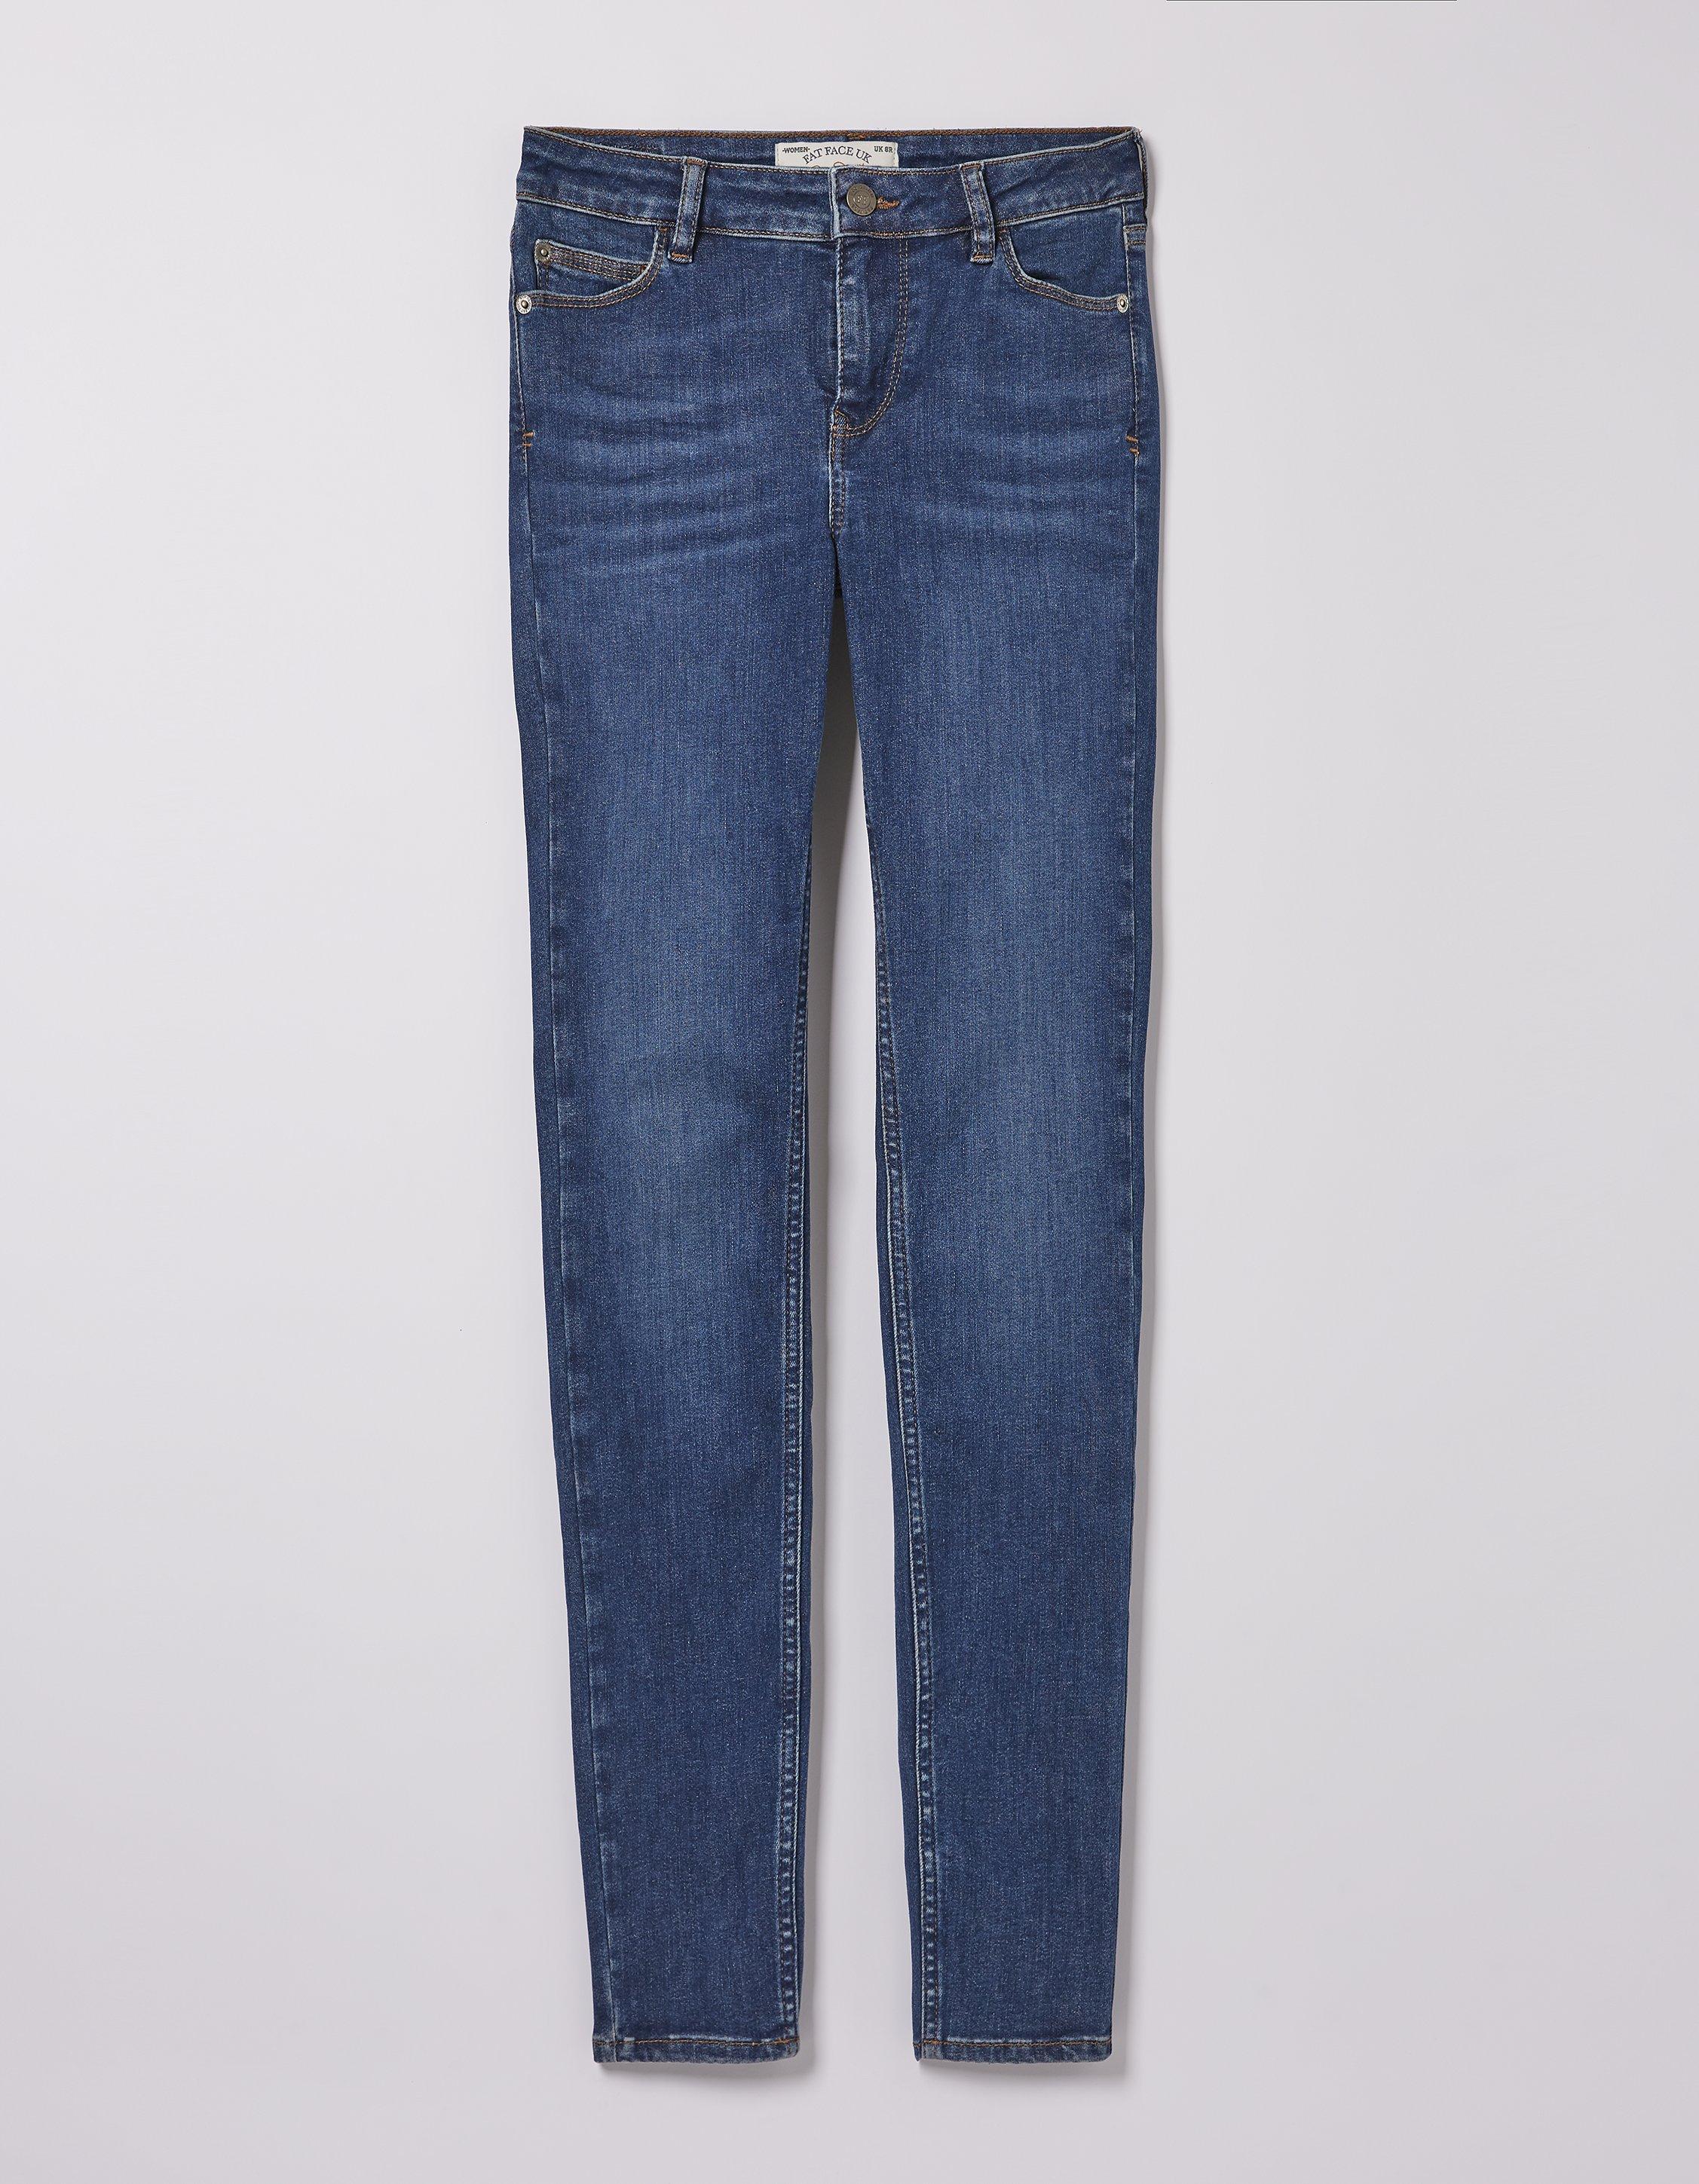 Express 80s Skinny Jeans for Women